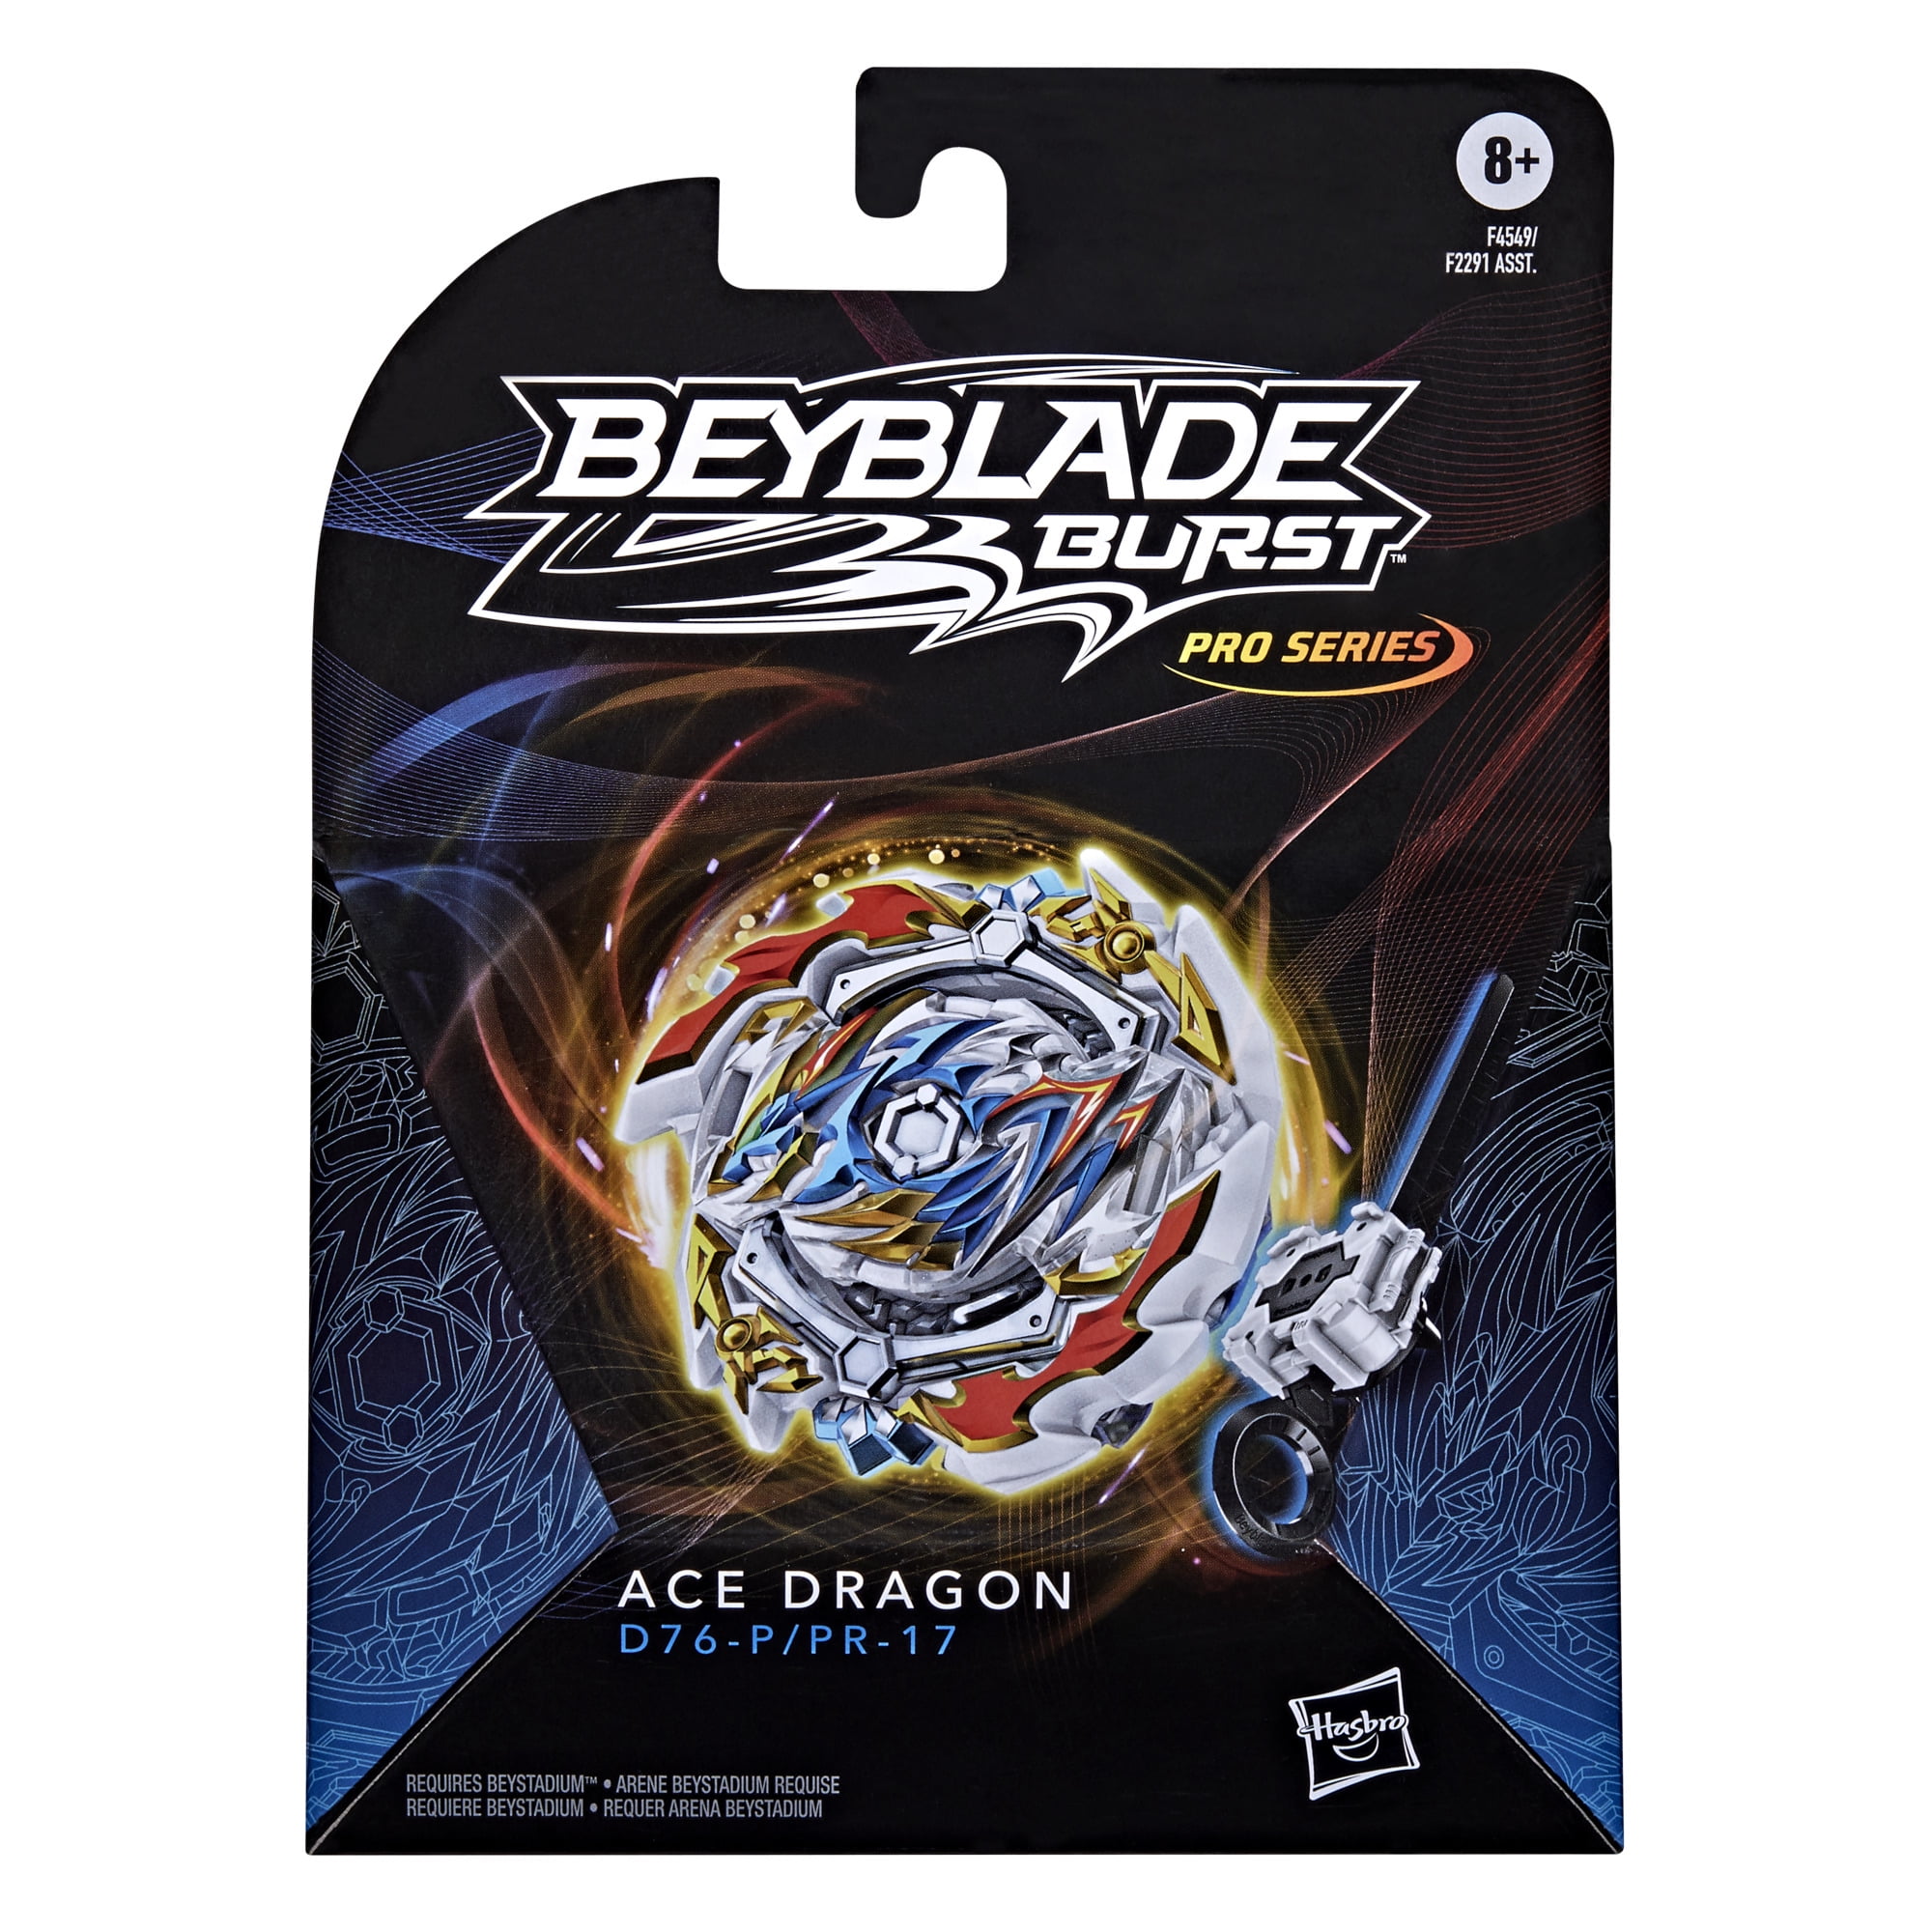 Beyblade Burst Pro Series Ace Dragon Spinning Top Starter Pack, with  Launcher 